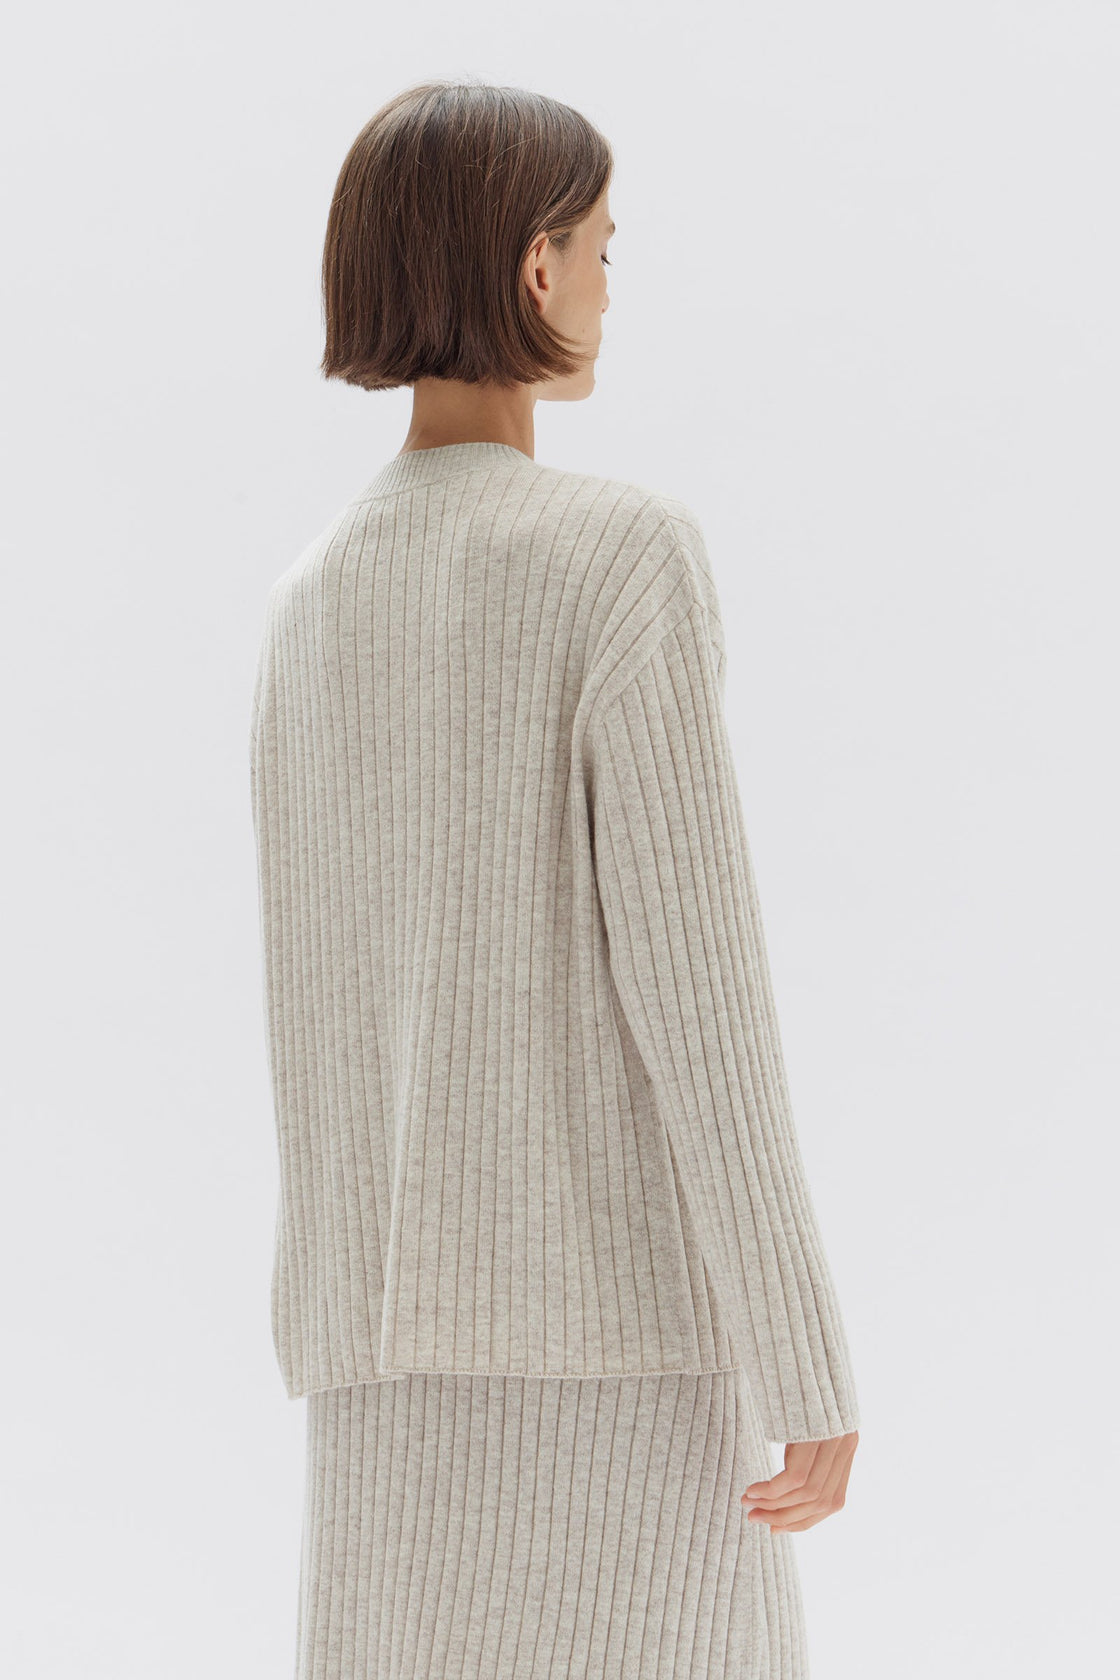 Assembly Label Wool Cashmere Rib Top